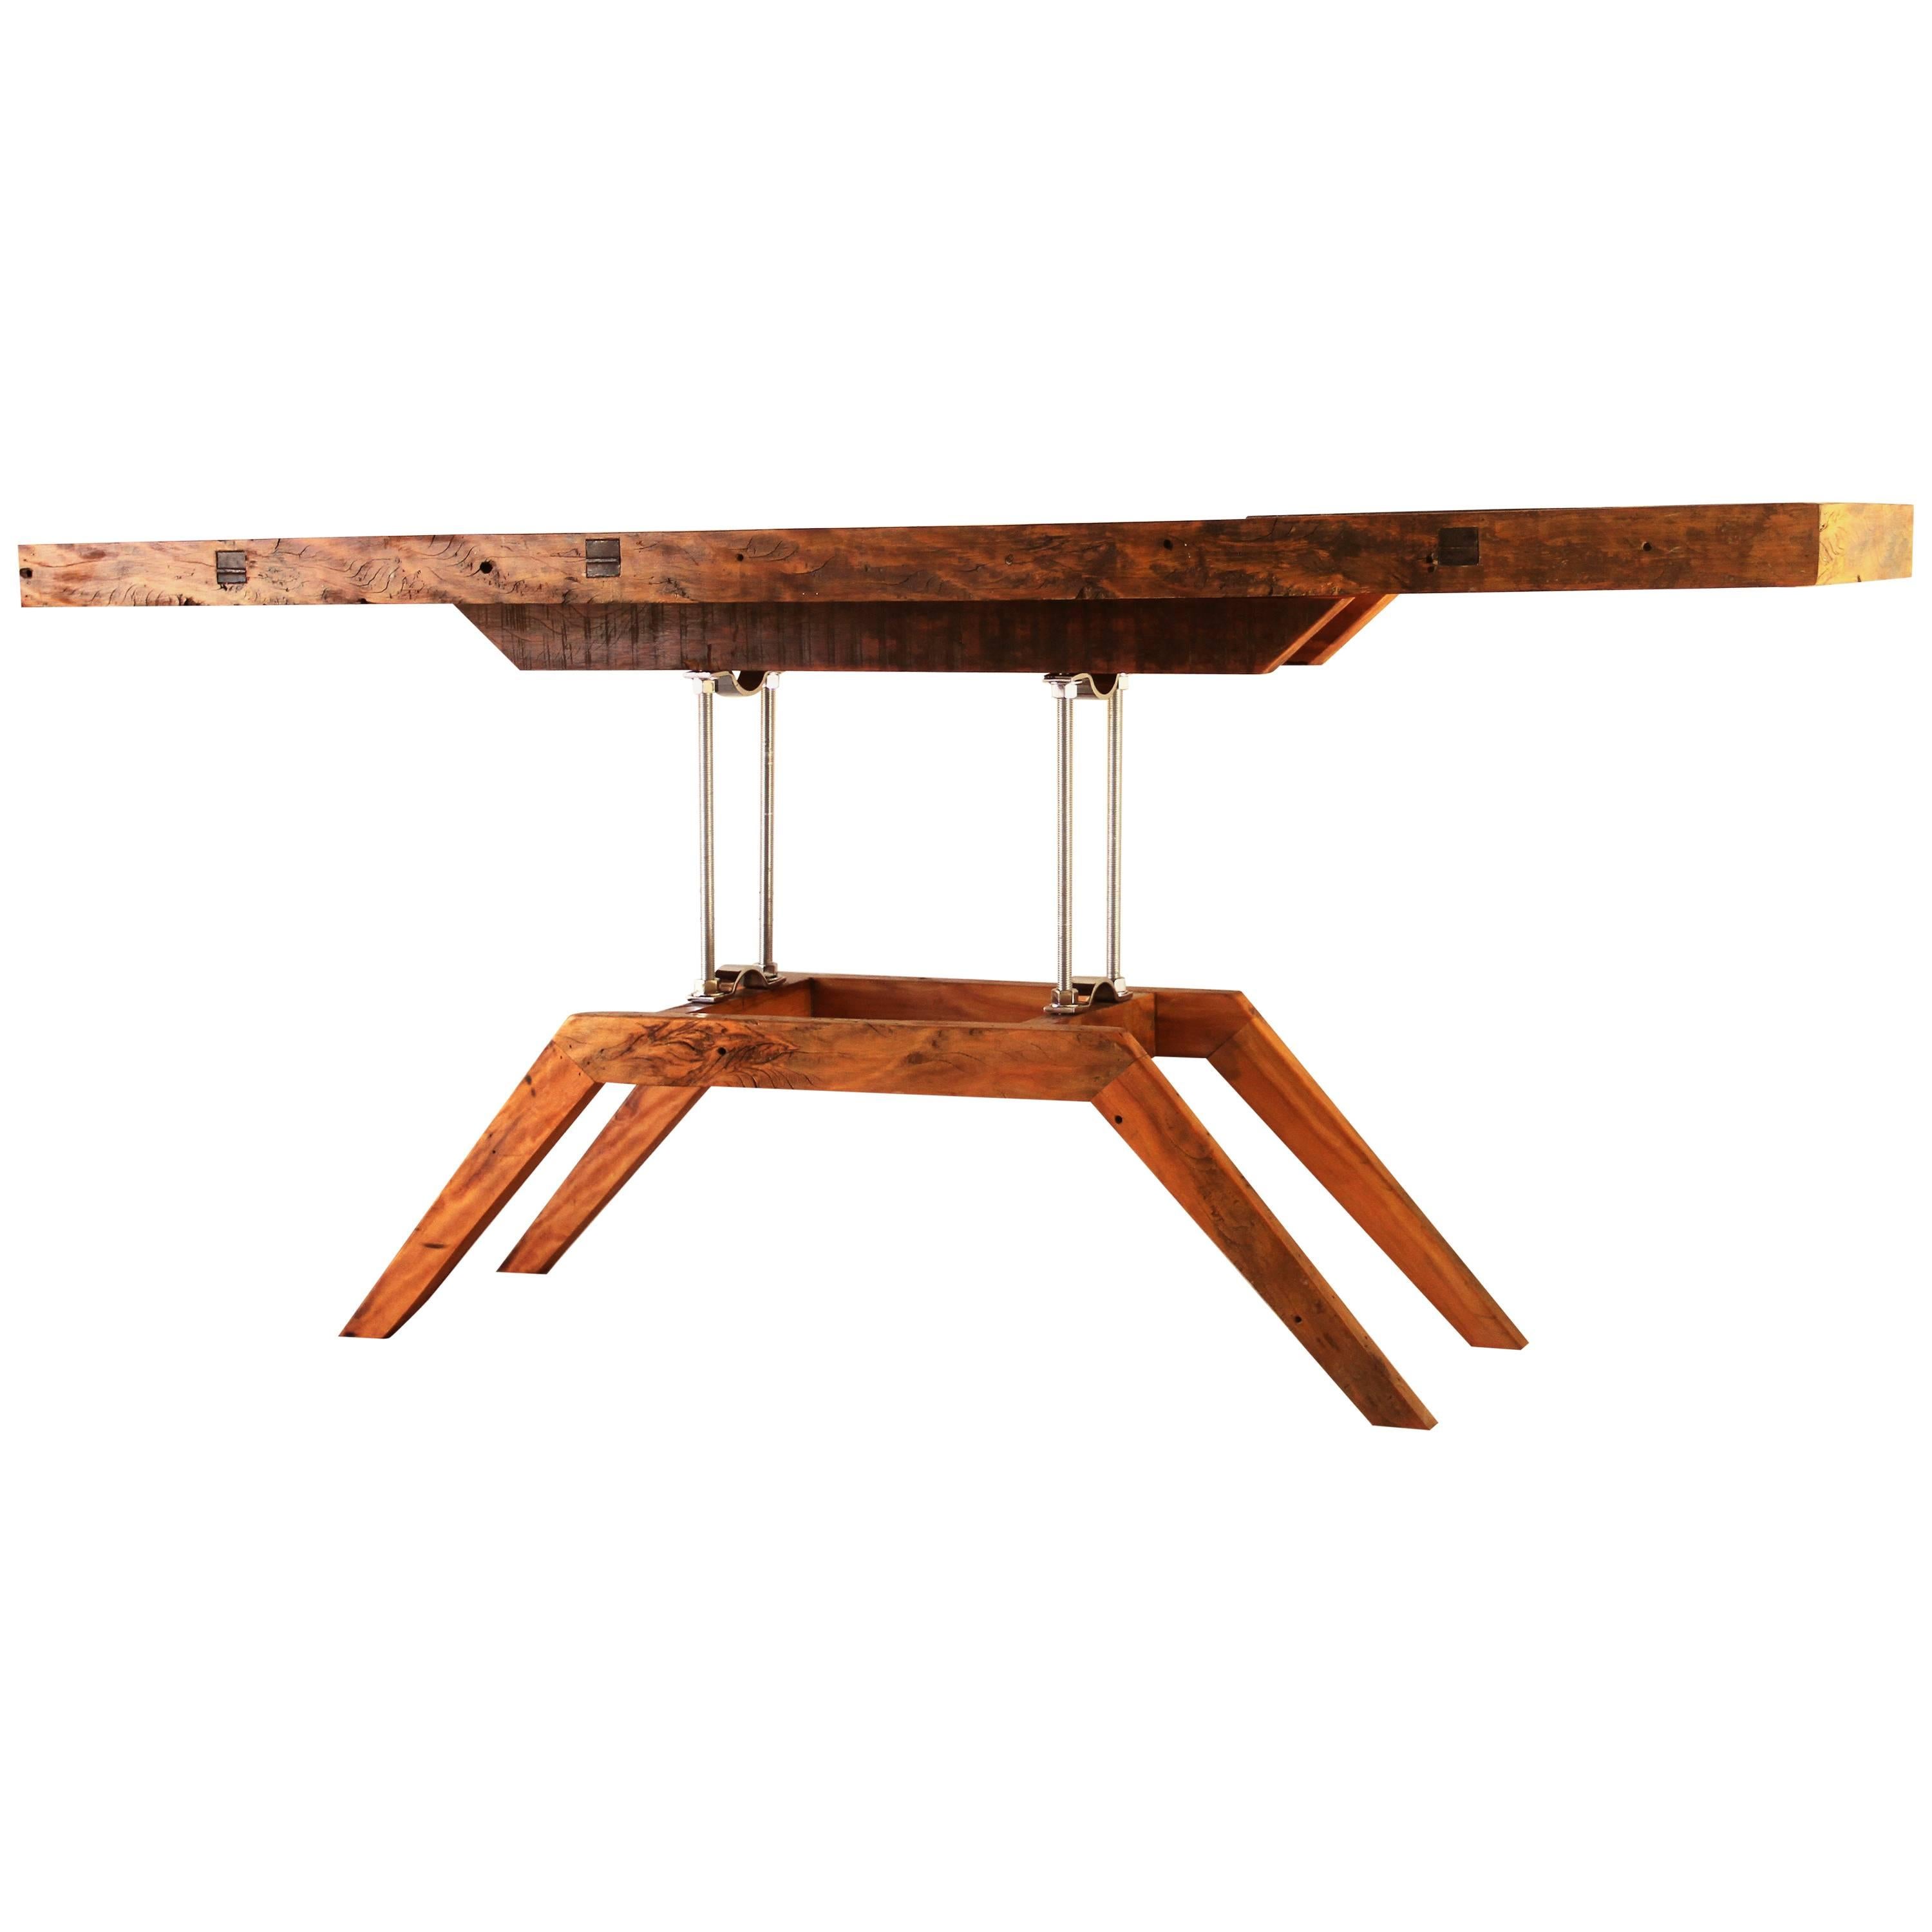 Modern Console Table, Brazilian Hardwood and Steel the "La Fiera" by Deodato For Sale